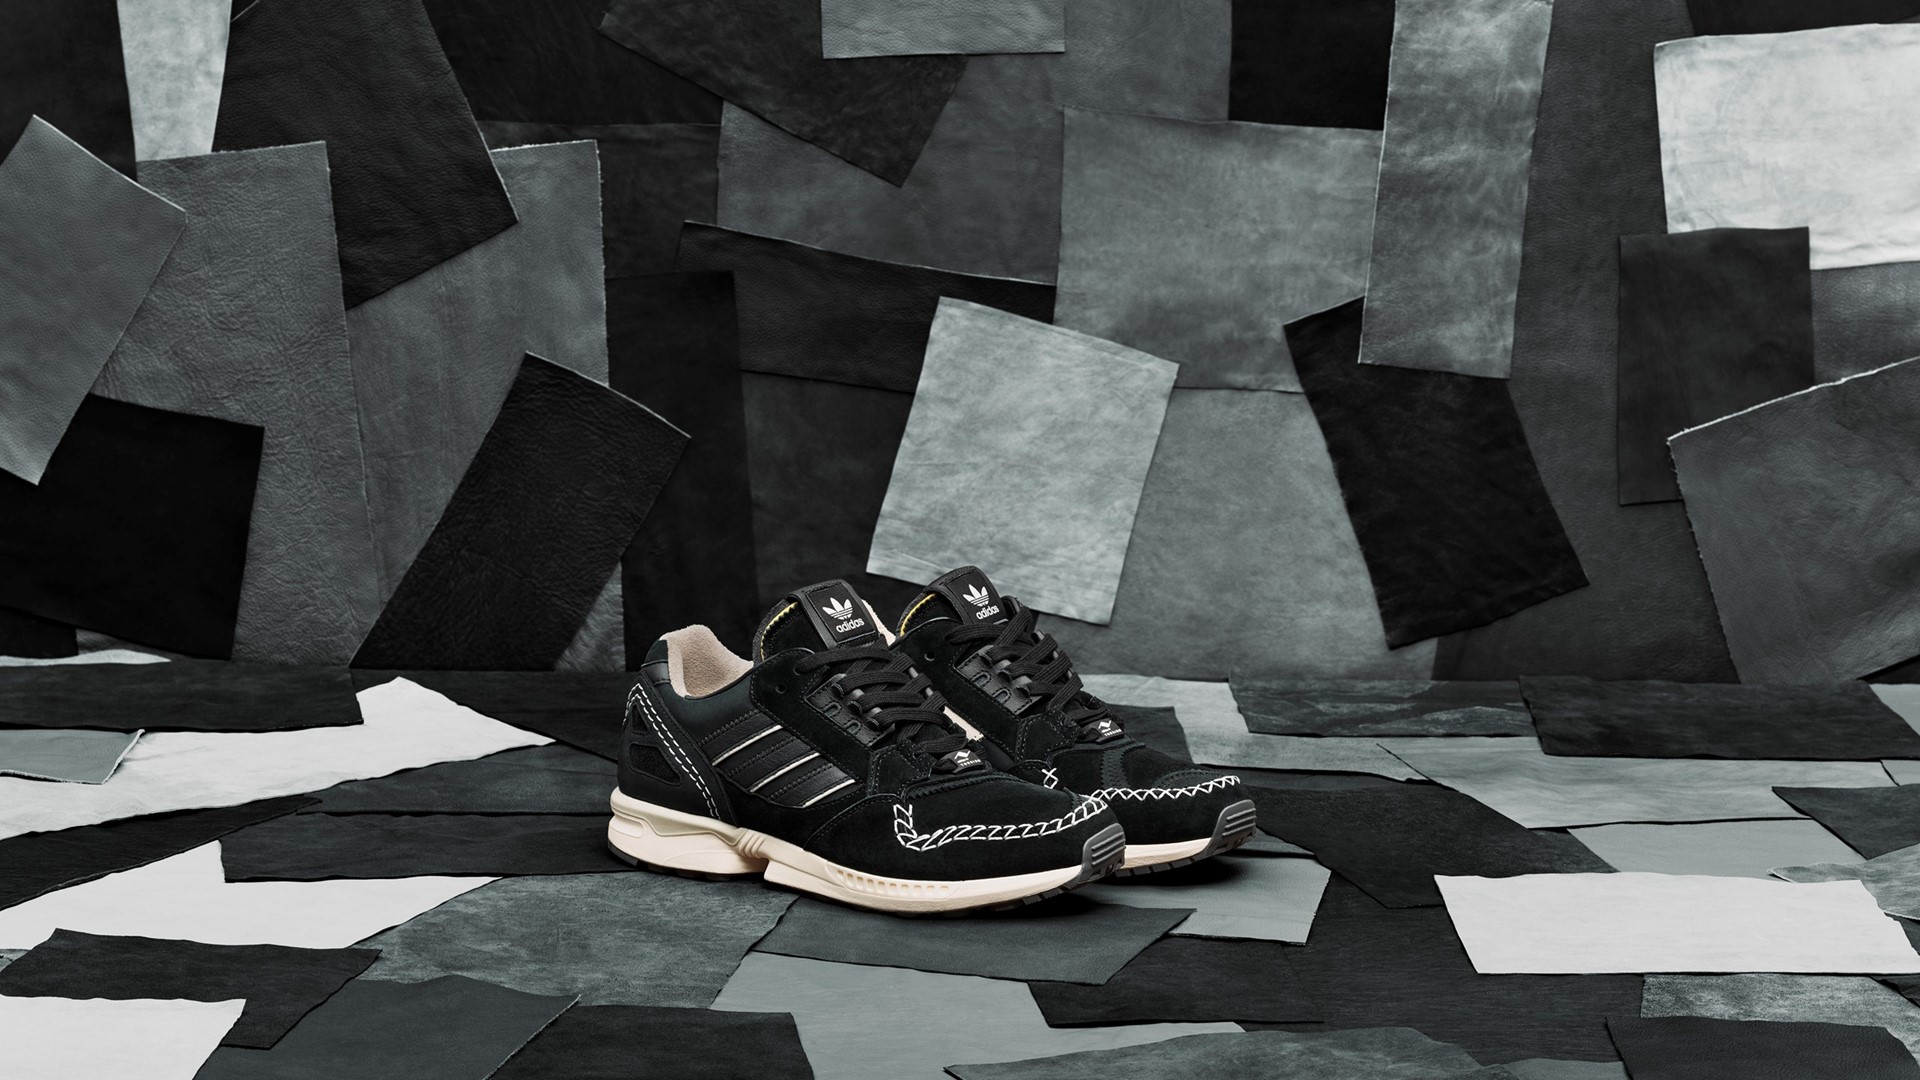 Y is for YCTN: The ZX 9000 YCTN Sneaker